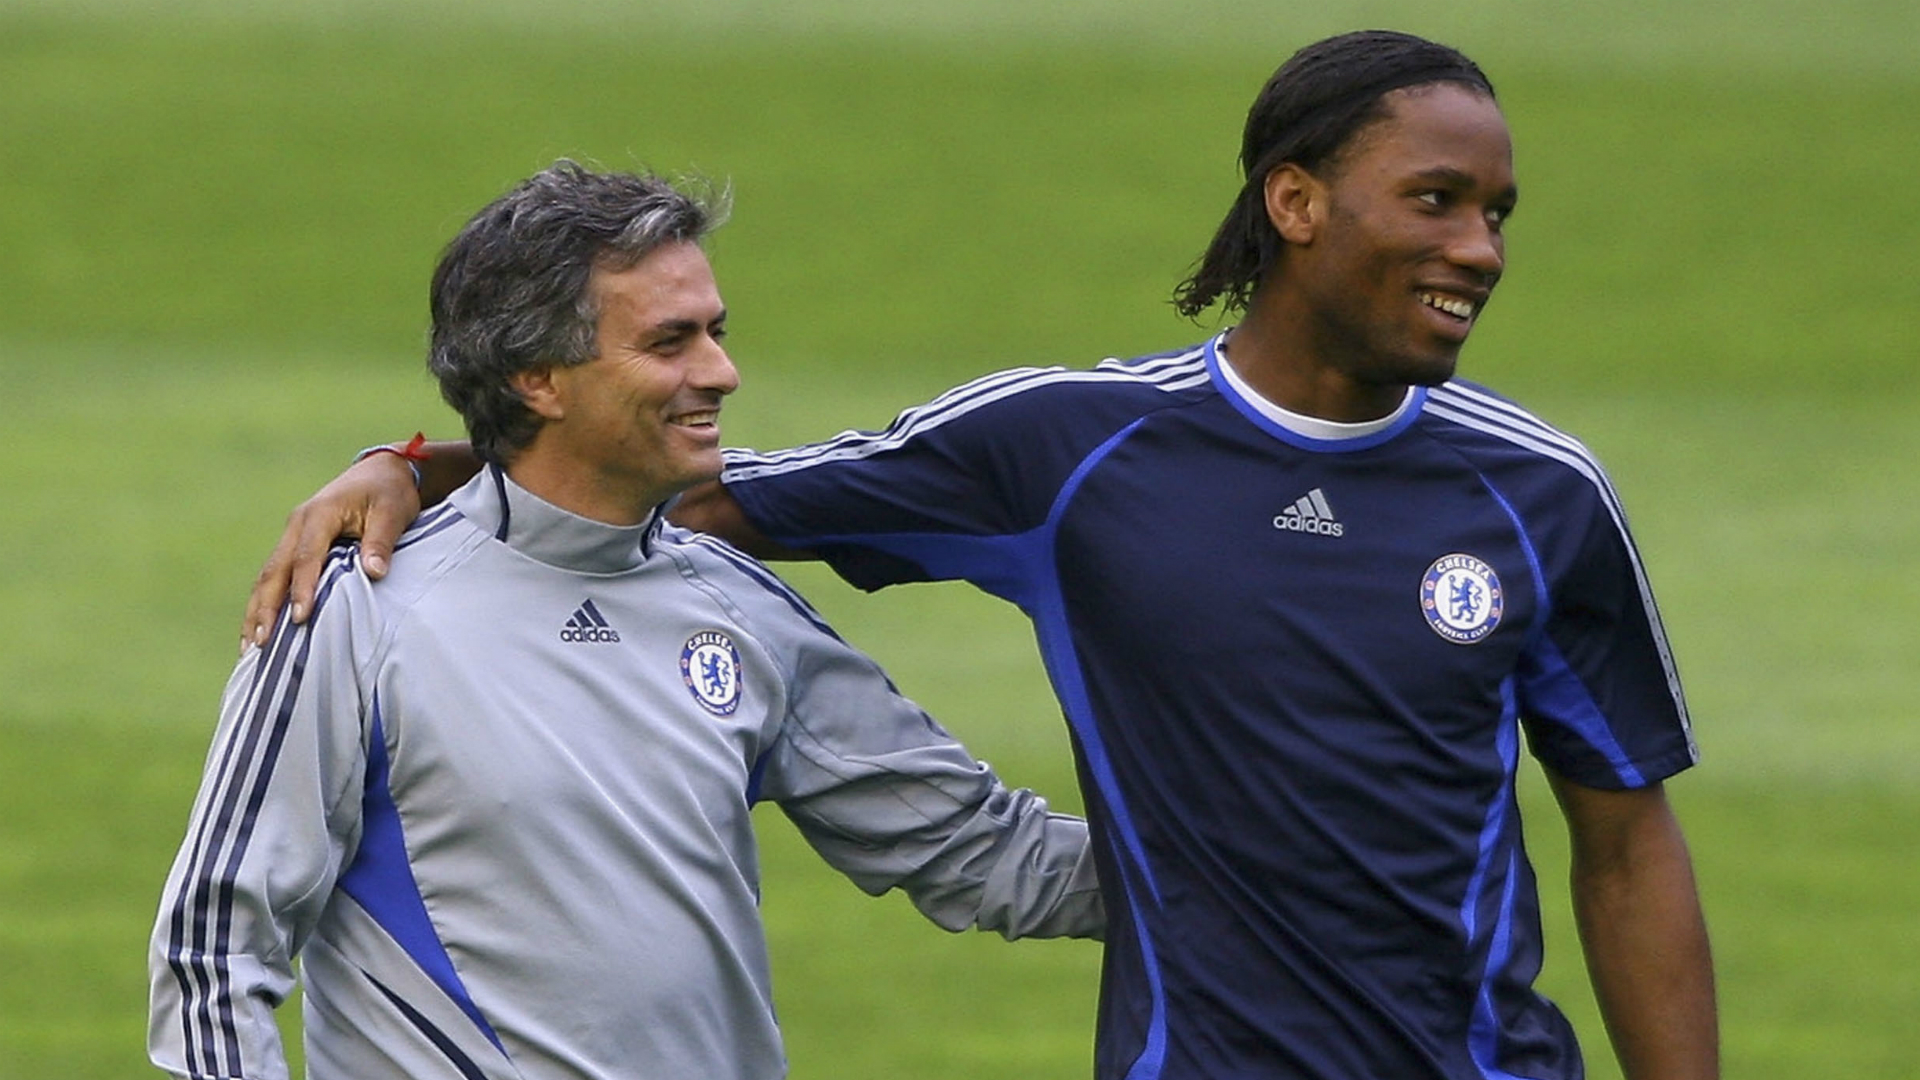 Chelsea v Manchester City: Was Drogba or Yaya more influential in his club's rise?